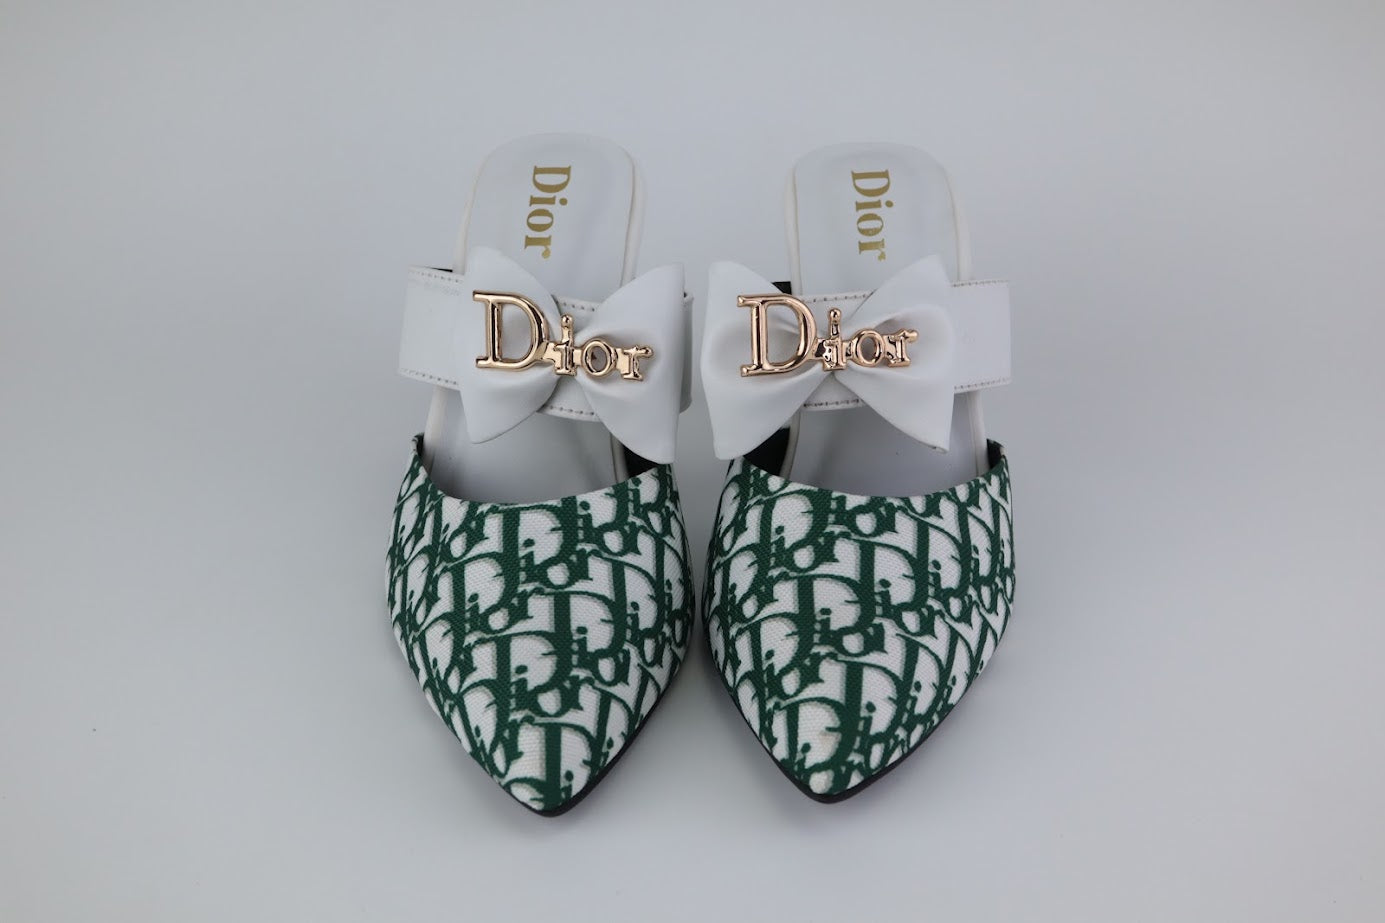 DIOR's Bow Heel Pumps Court Shoes - Exclusive Pricing for Pakistan